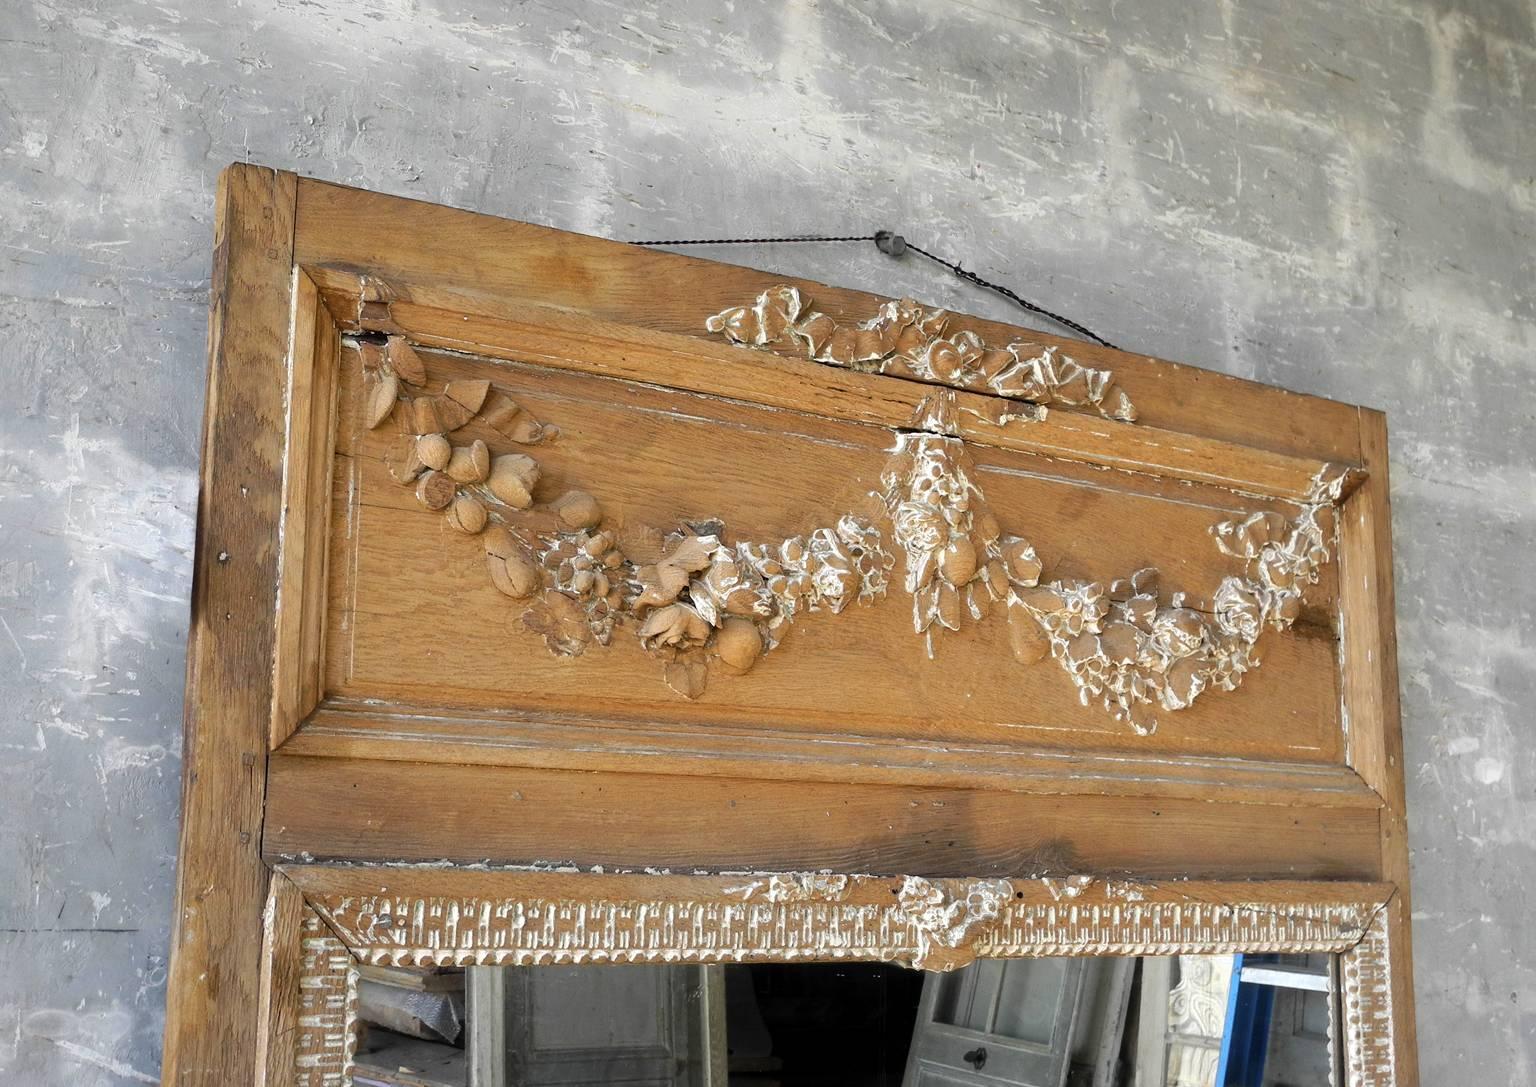 This is a beautifully carved antique 18th century trumeau mirror from the boiseried dining room of a 